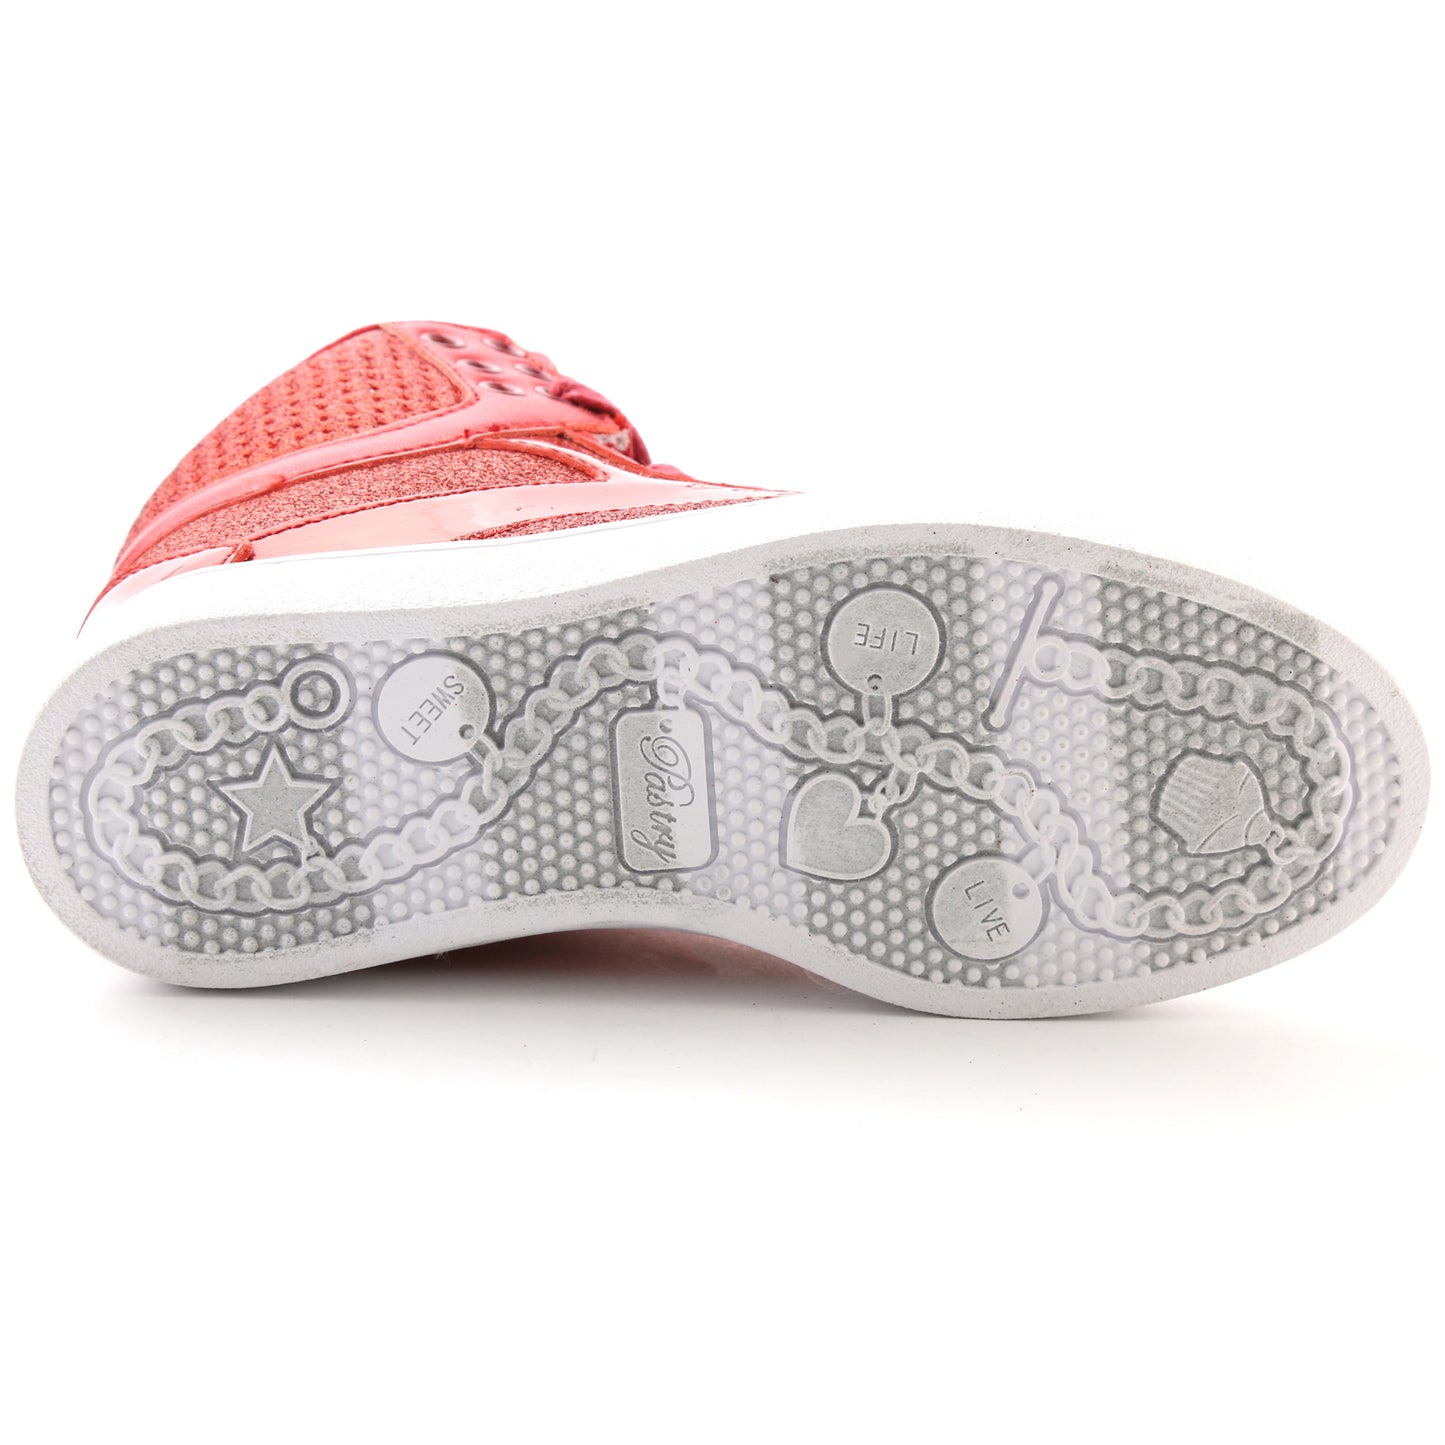 Pastry Pop Tart Glitter Youth Sneaker in Red outsole view